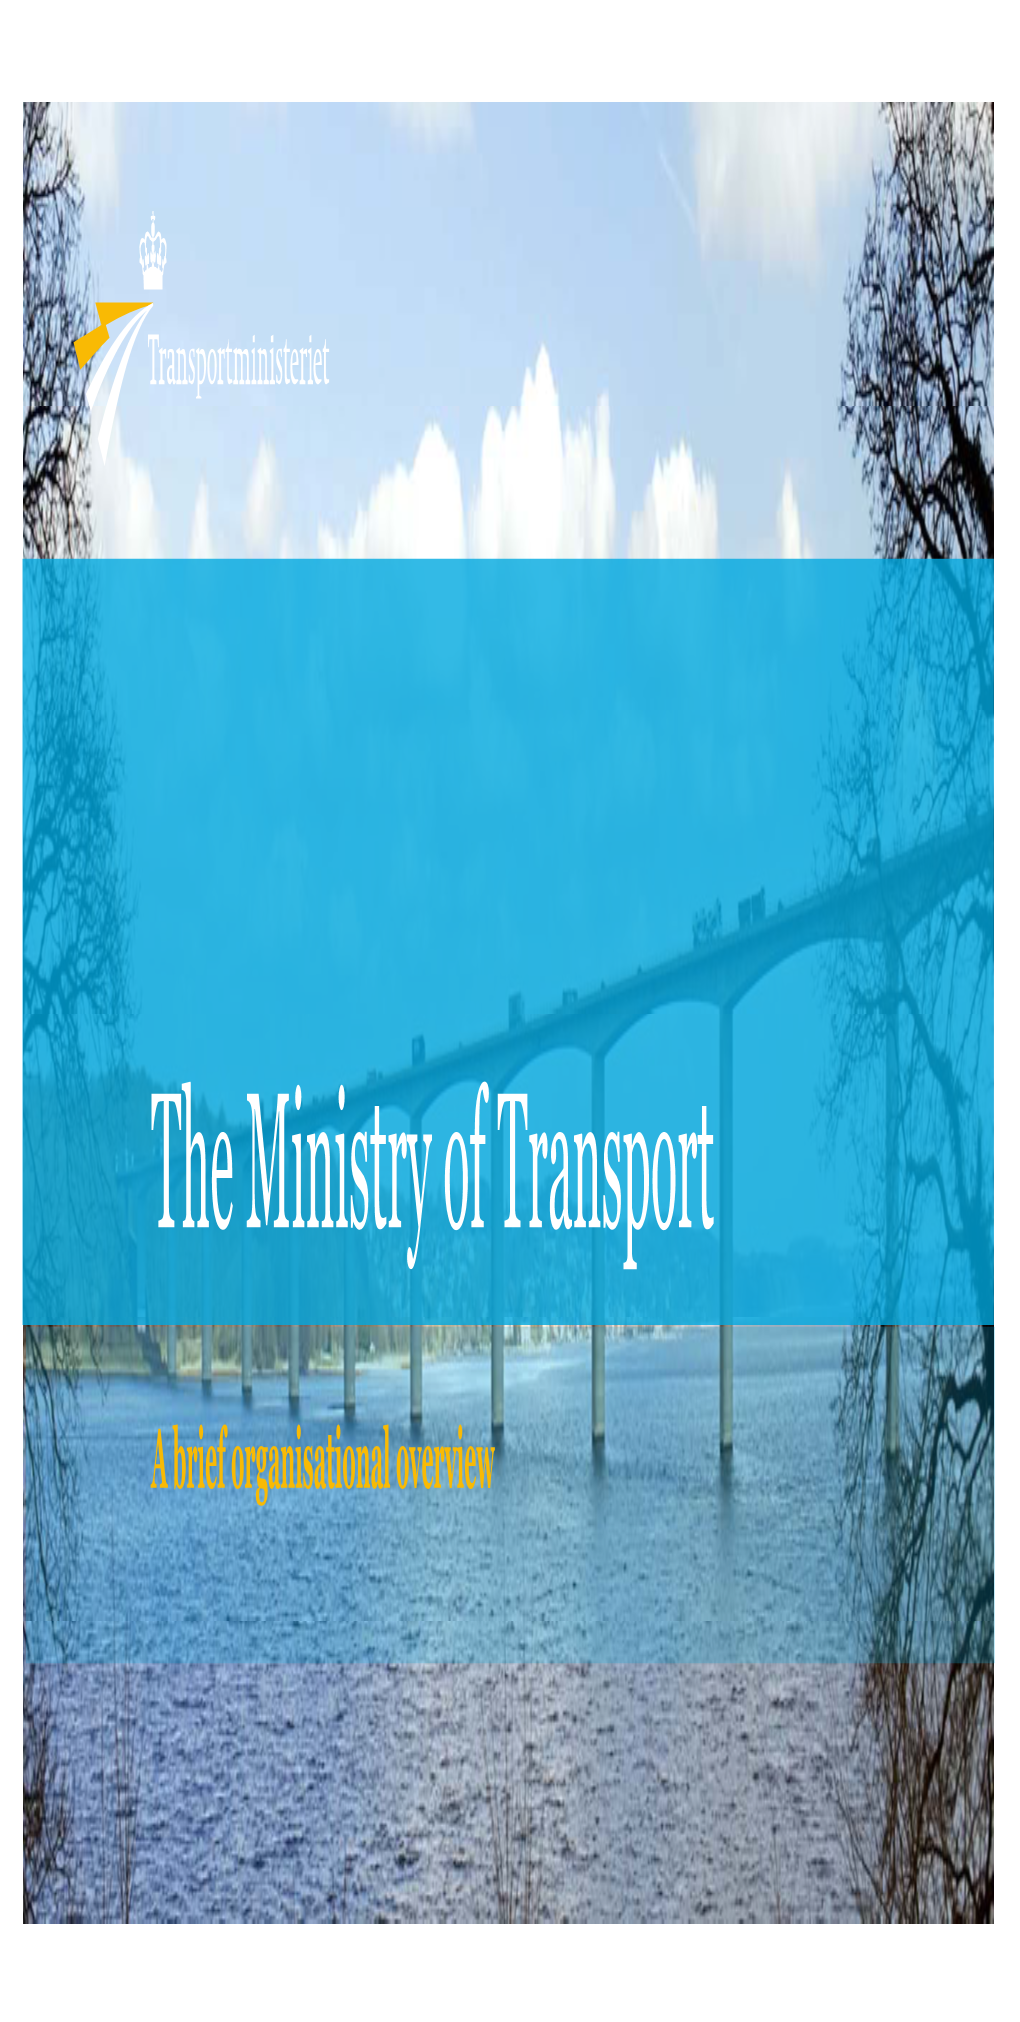 The Ministry of Transport, a Briet Organisational Overview